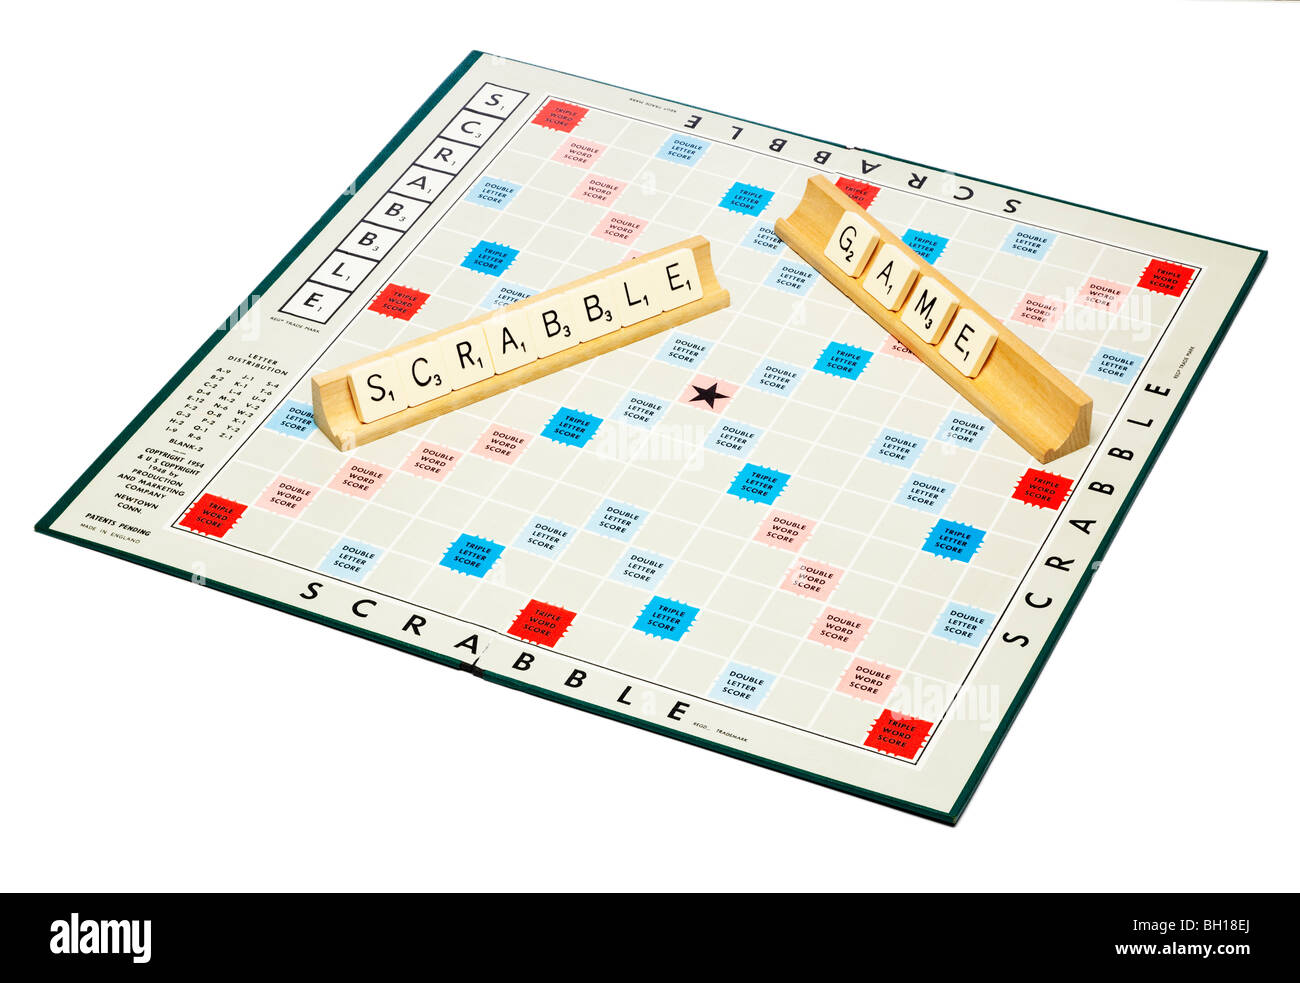 Scrabble board game with scrabble game spelled out Stock Photo